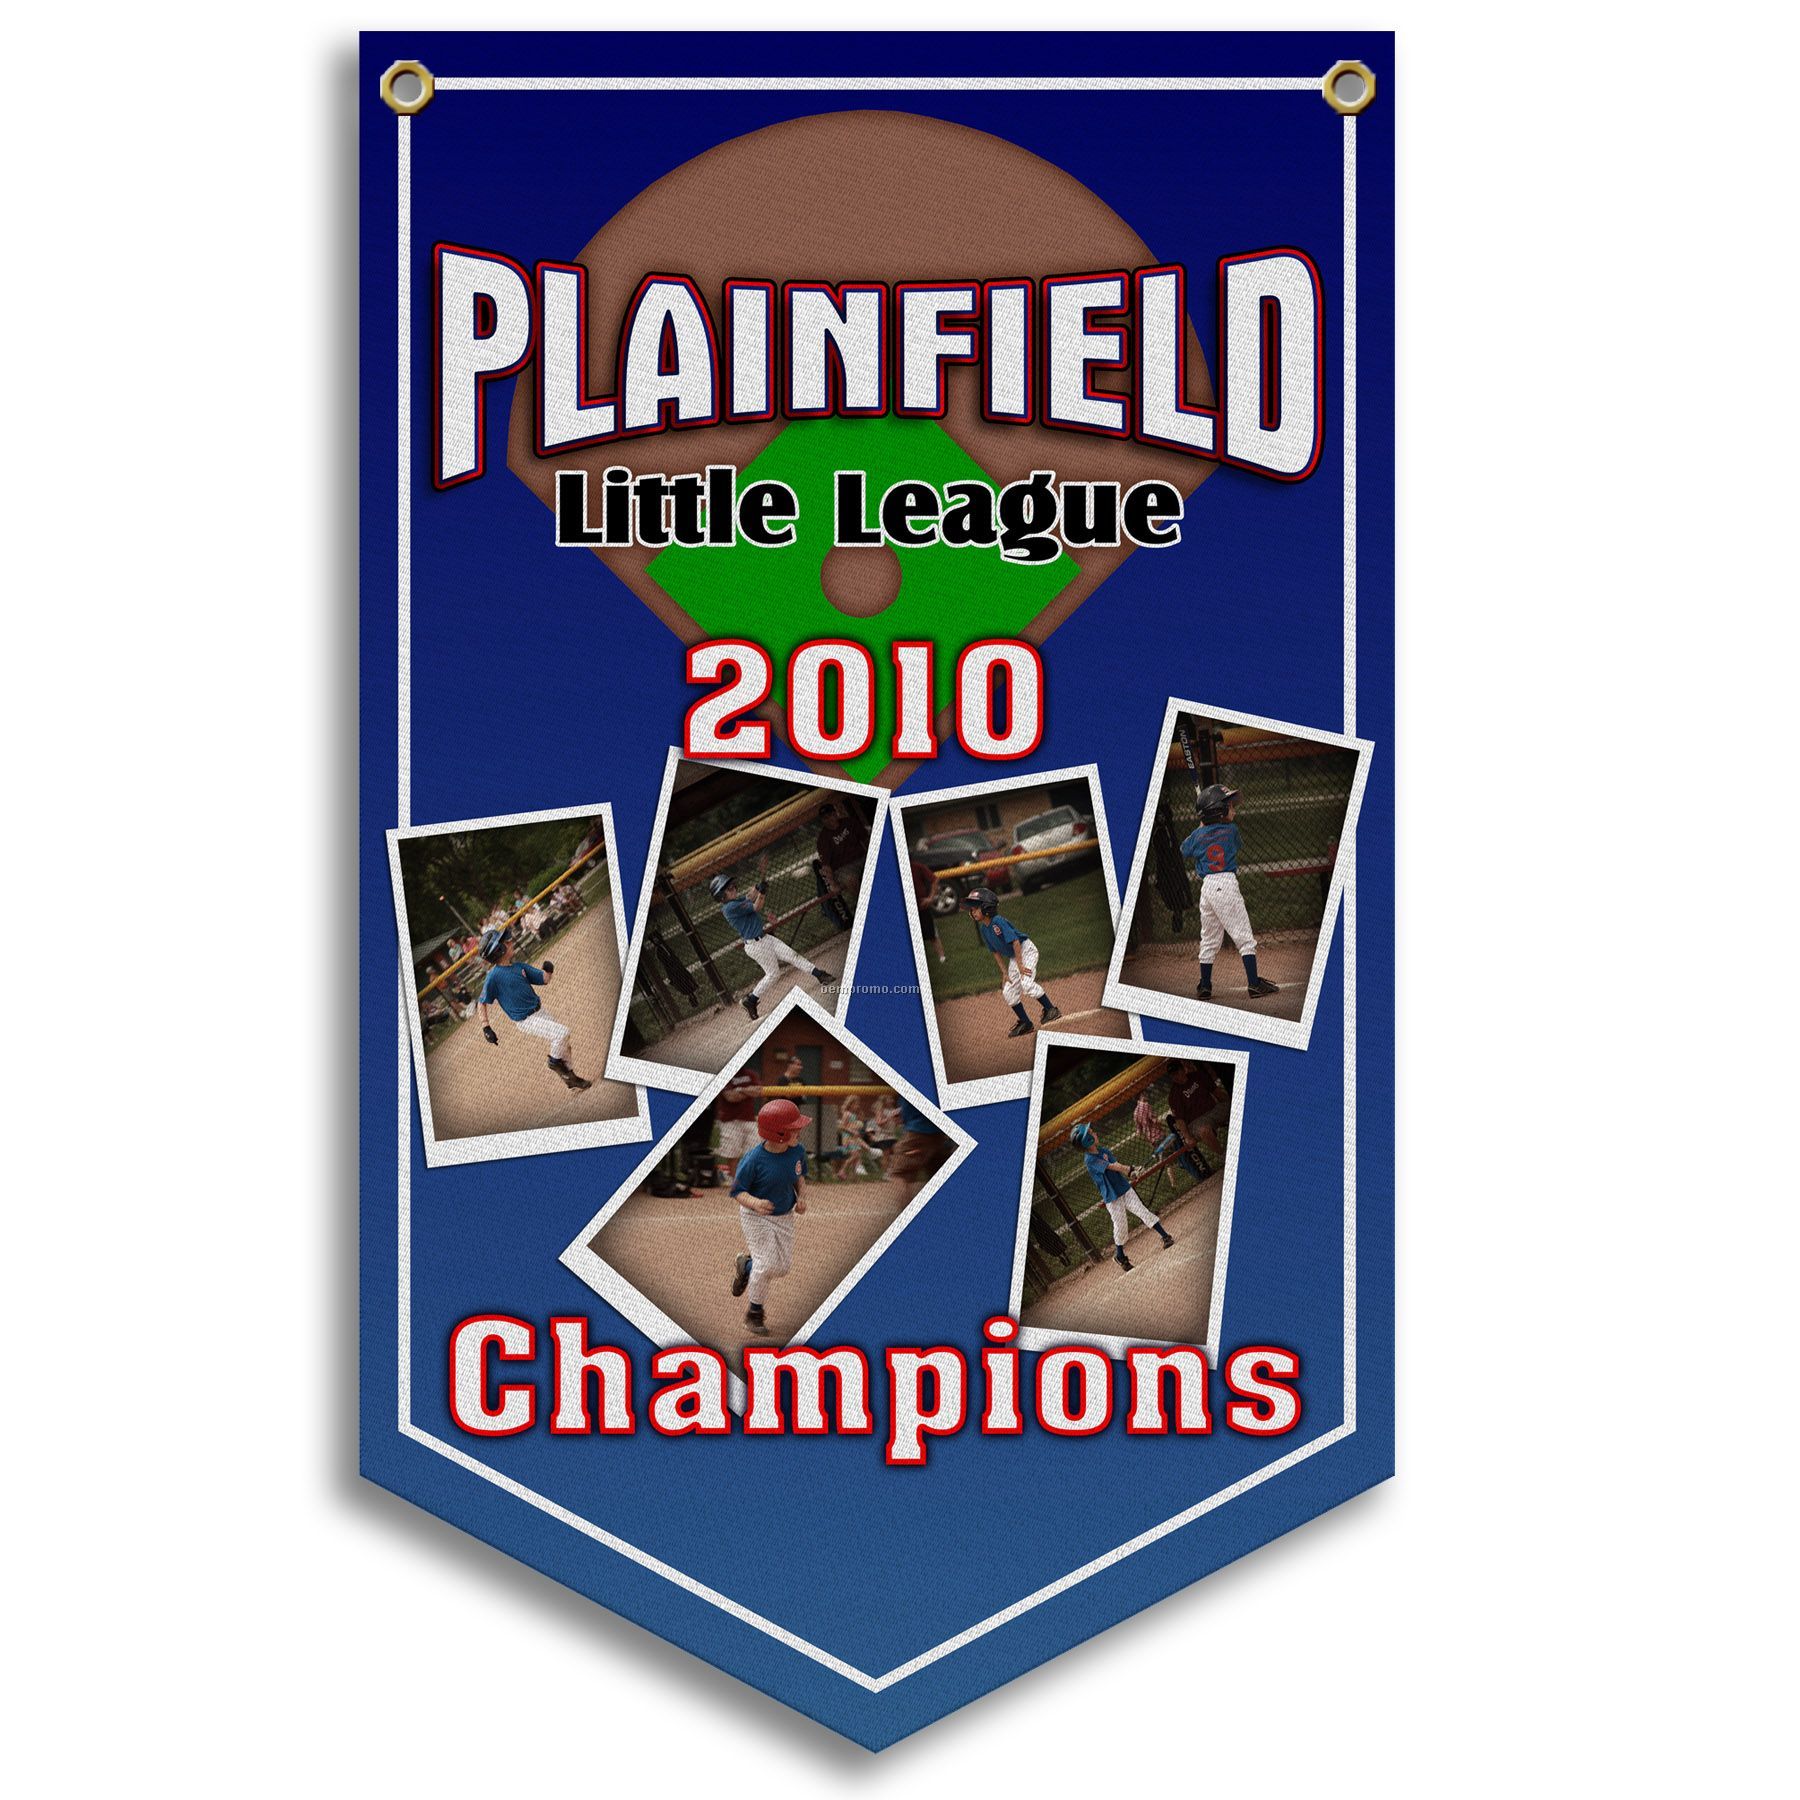 Championship Banners - 6' X 8' Full Color Imprint